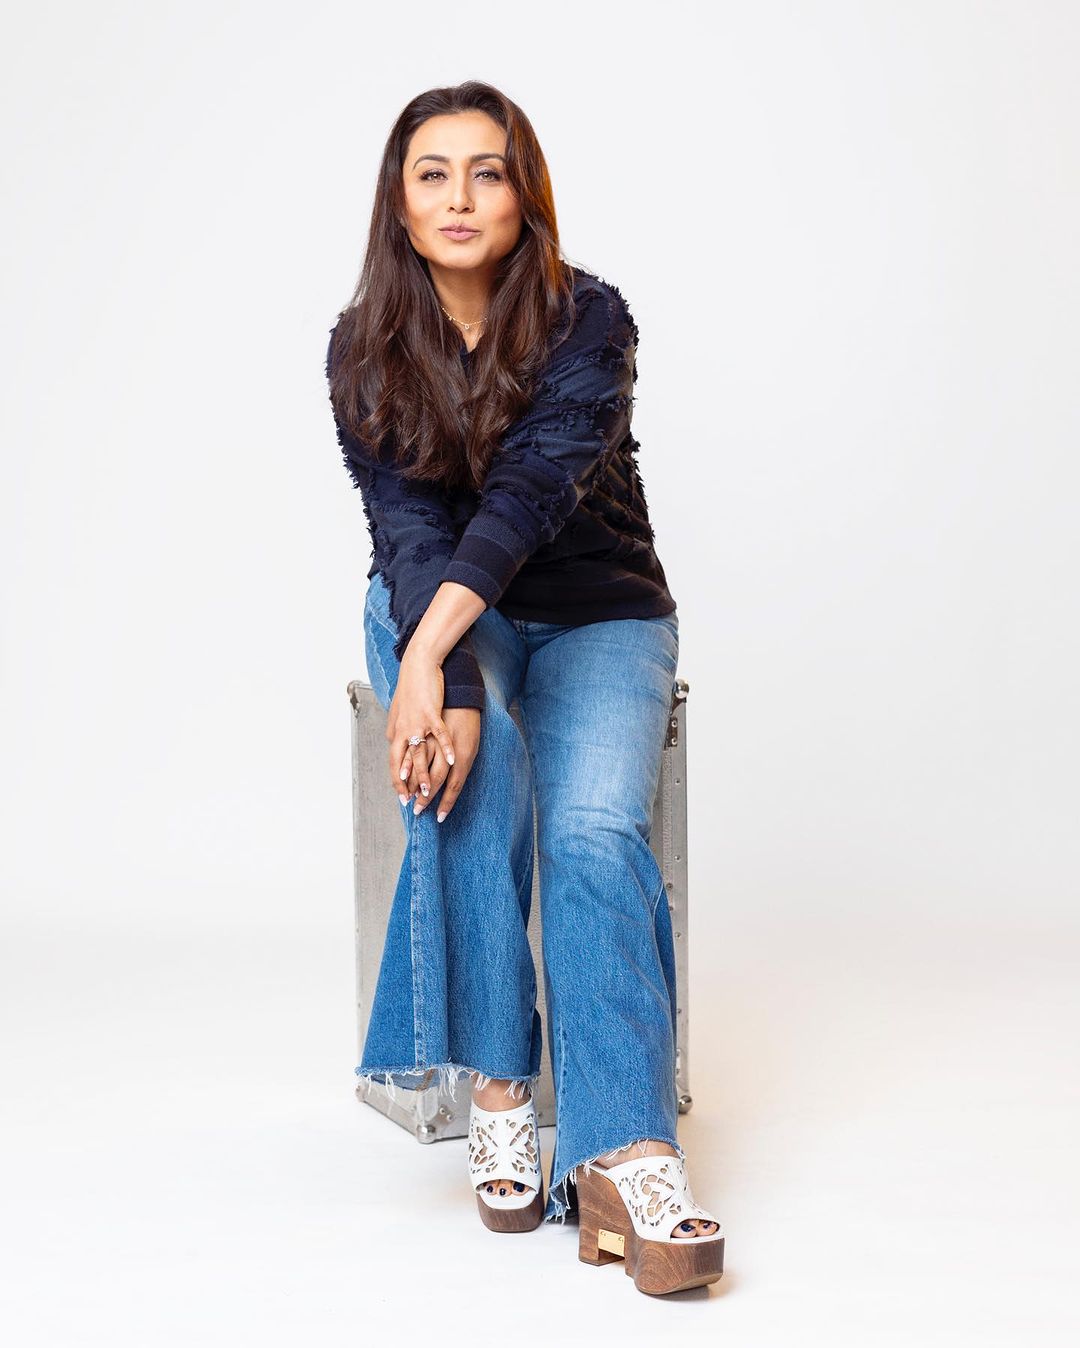 The actress adds a playful mood to her recent wardrobe with this casual look - sweatshirt and denims